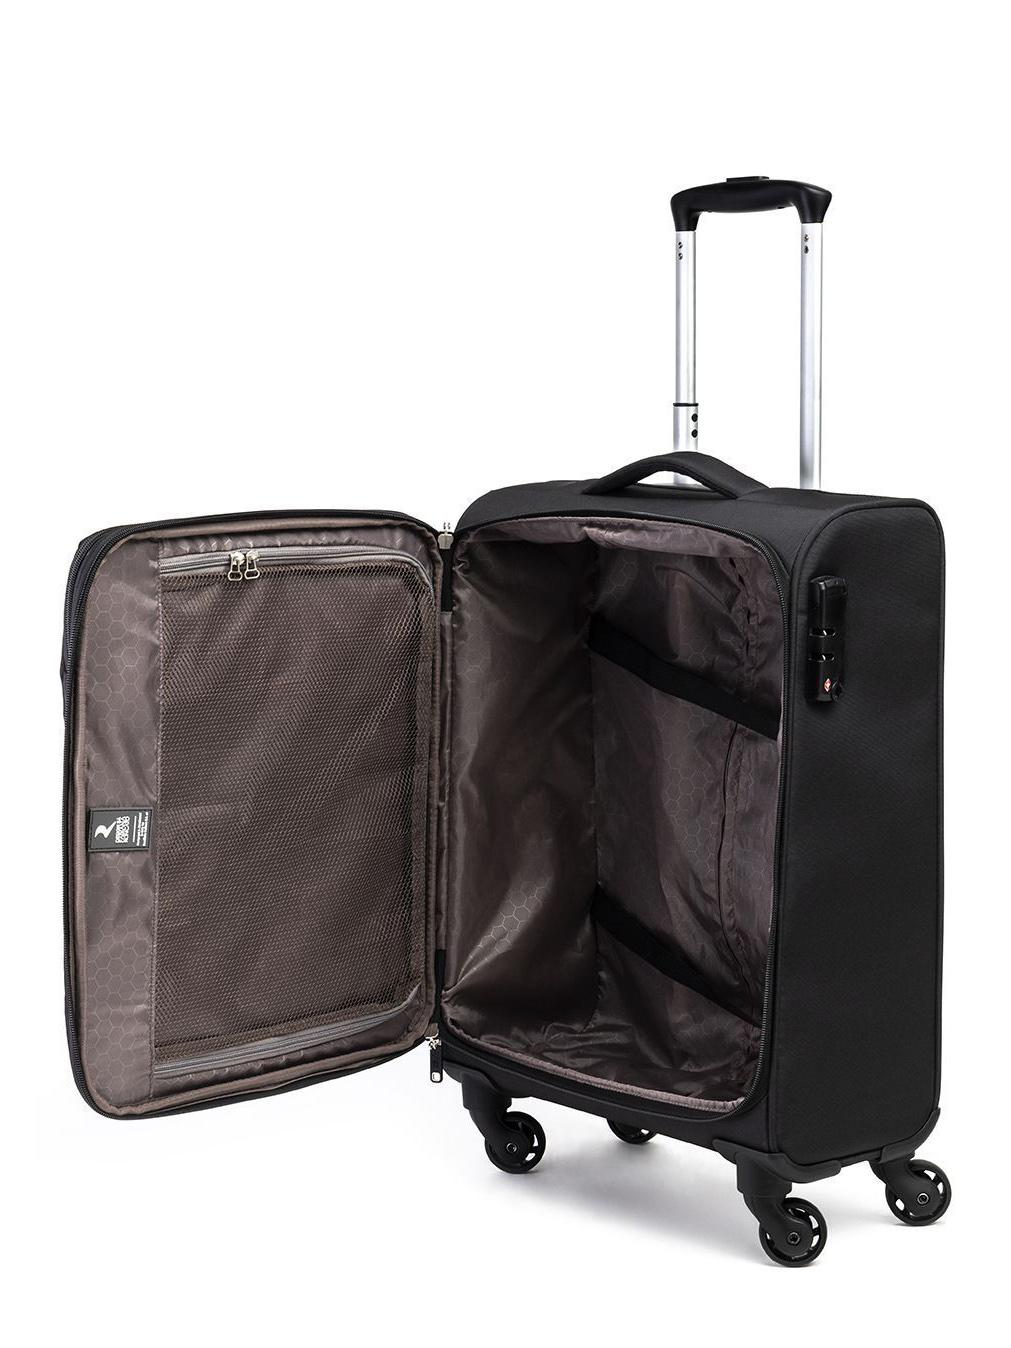 R Roncato Eco-Mood Hand Luggage Trolley Black - Buy At Outlet Prices!